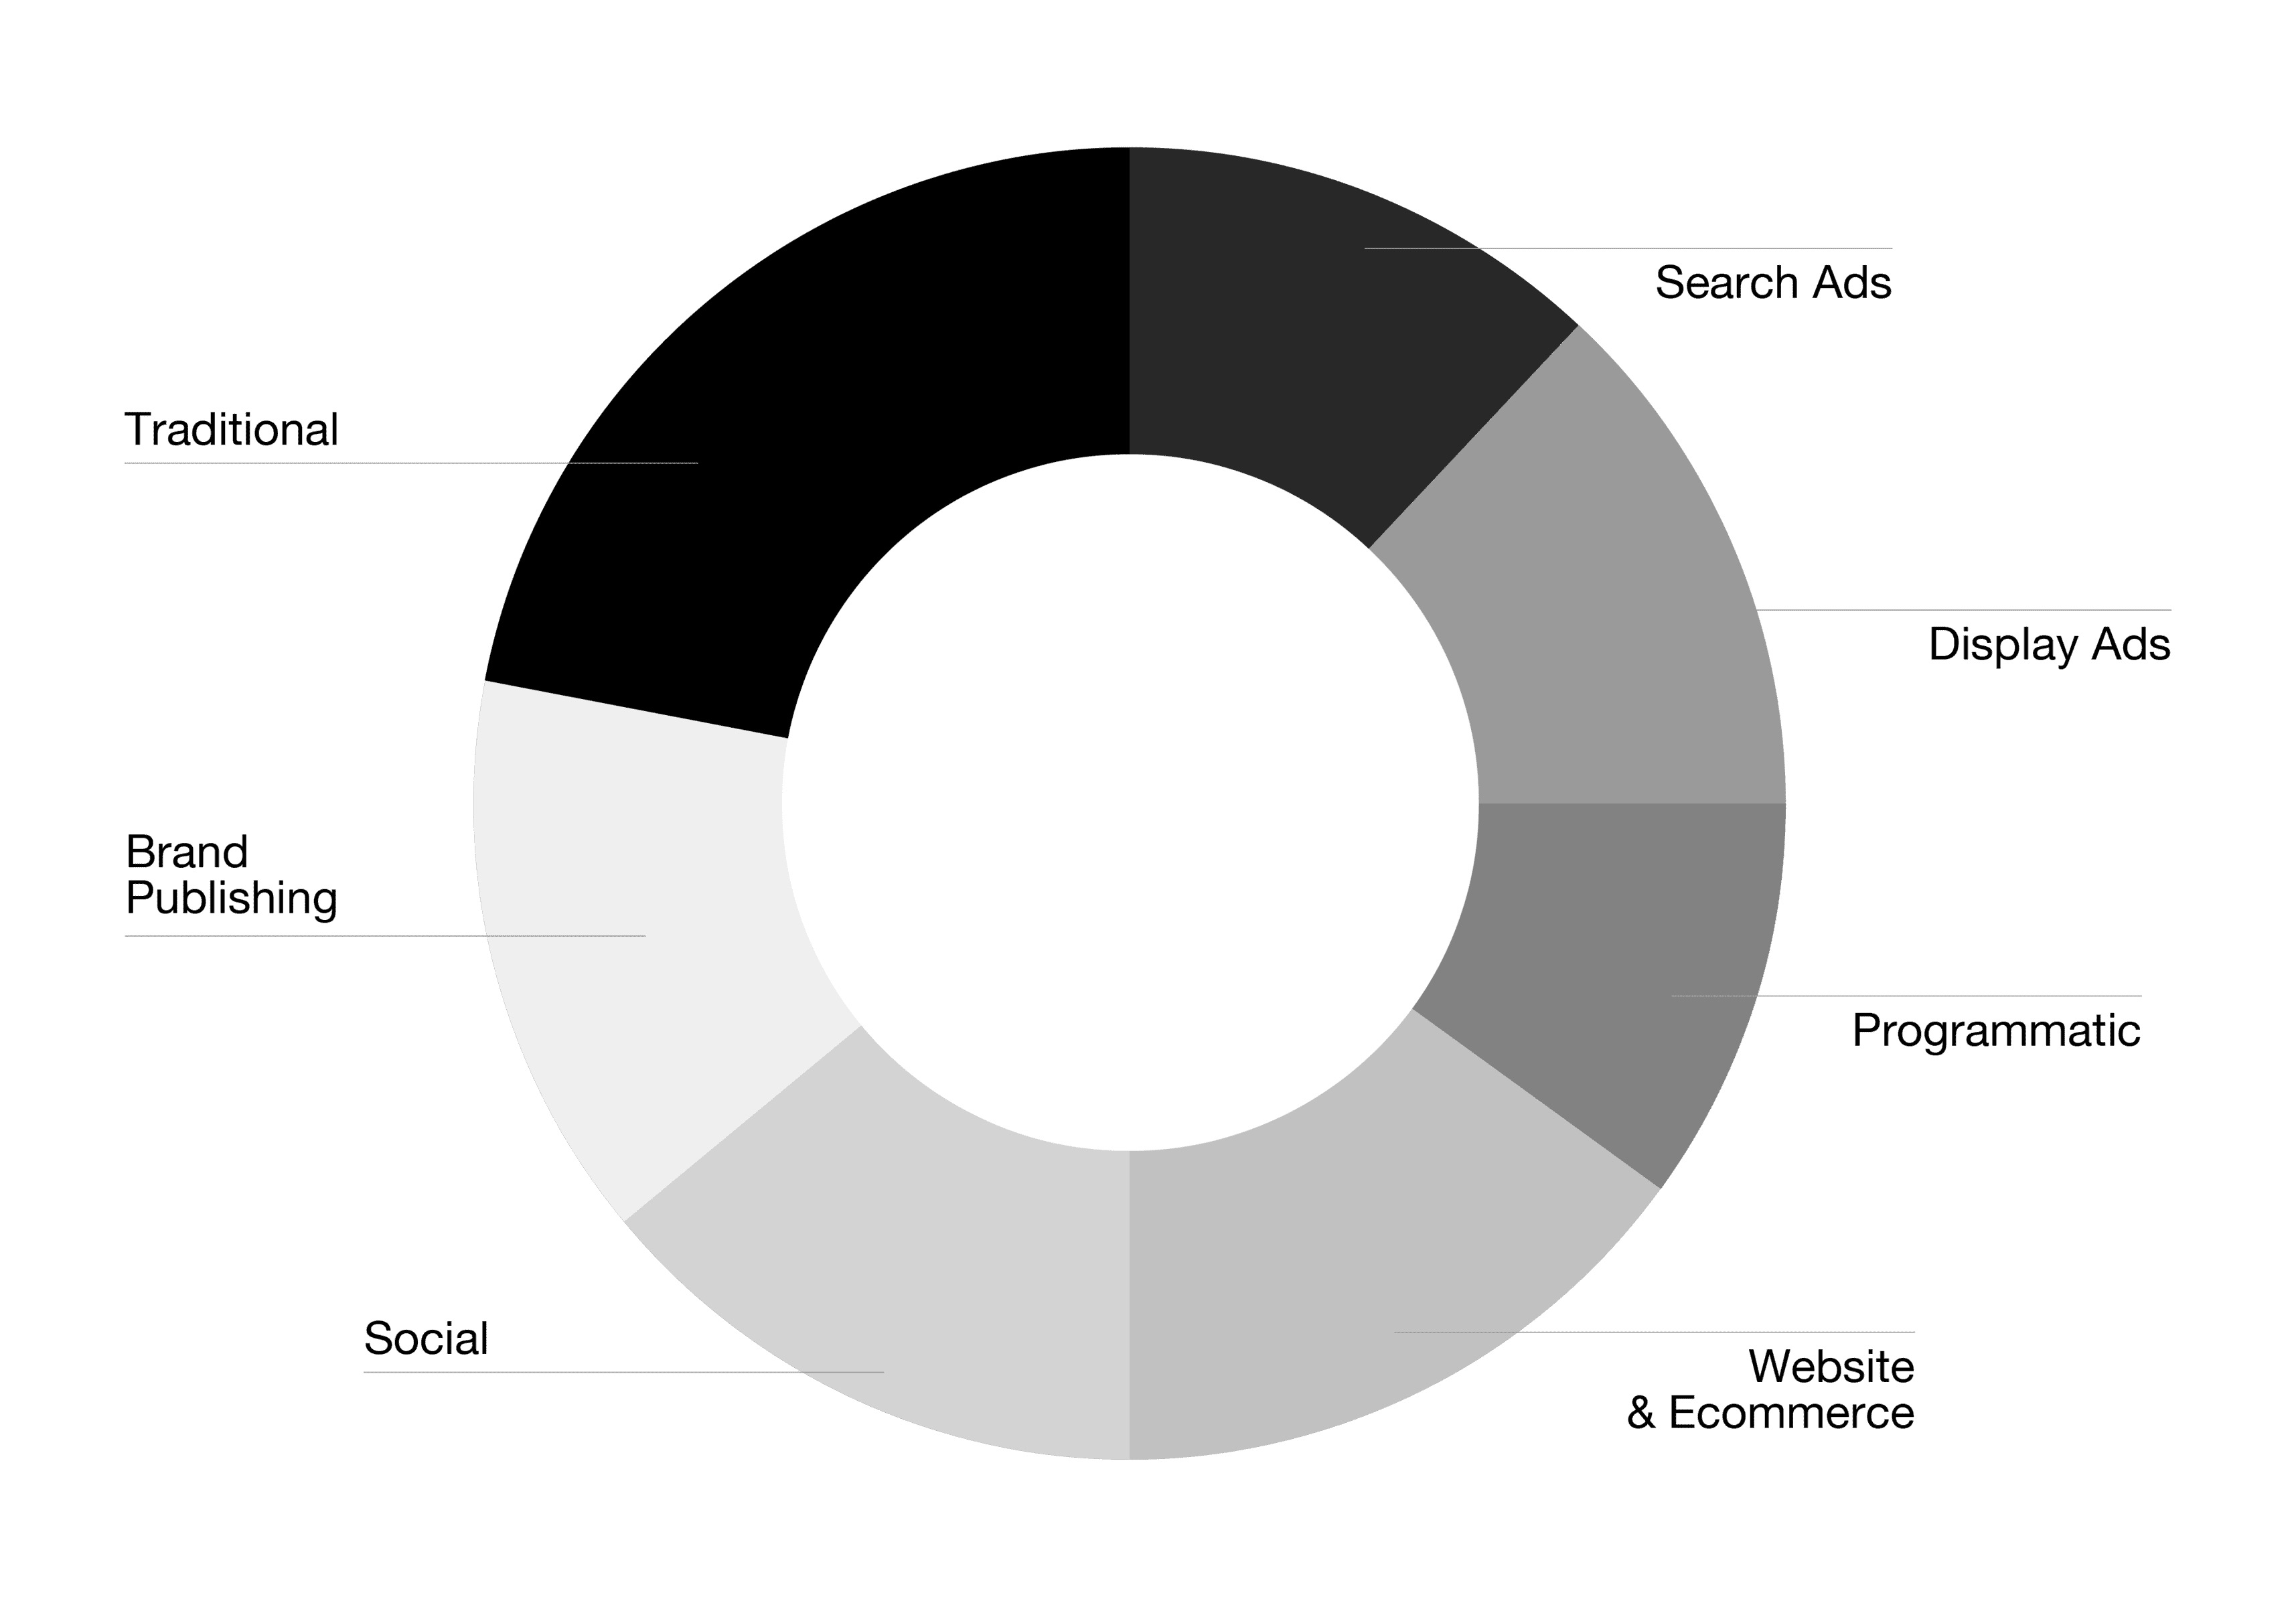 a circle chart segmented by different categories of a marketing budget including traditional (ads) search ads, display ads, programmatic spend, website, social, and brand publishing